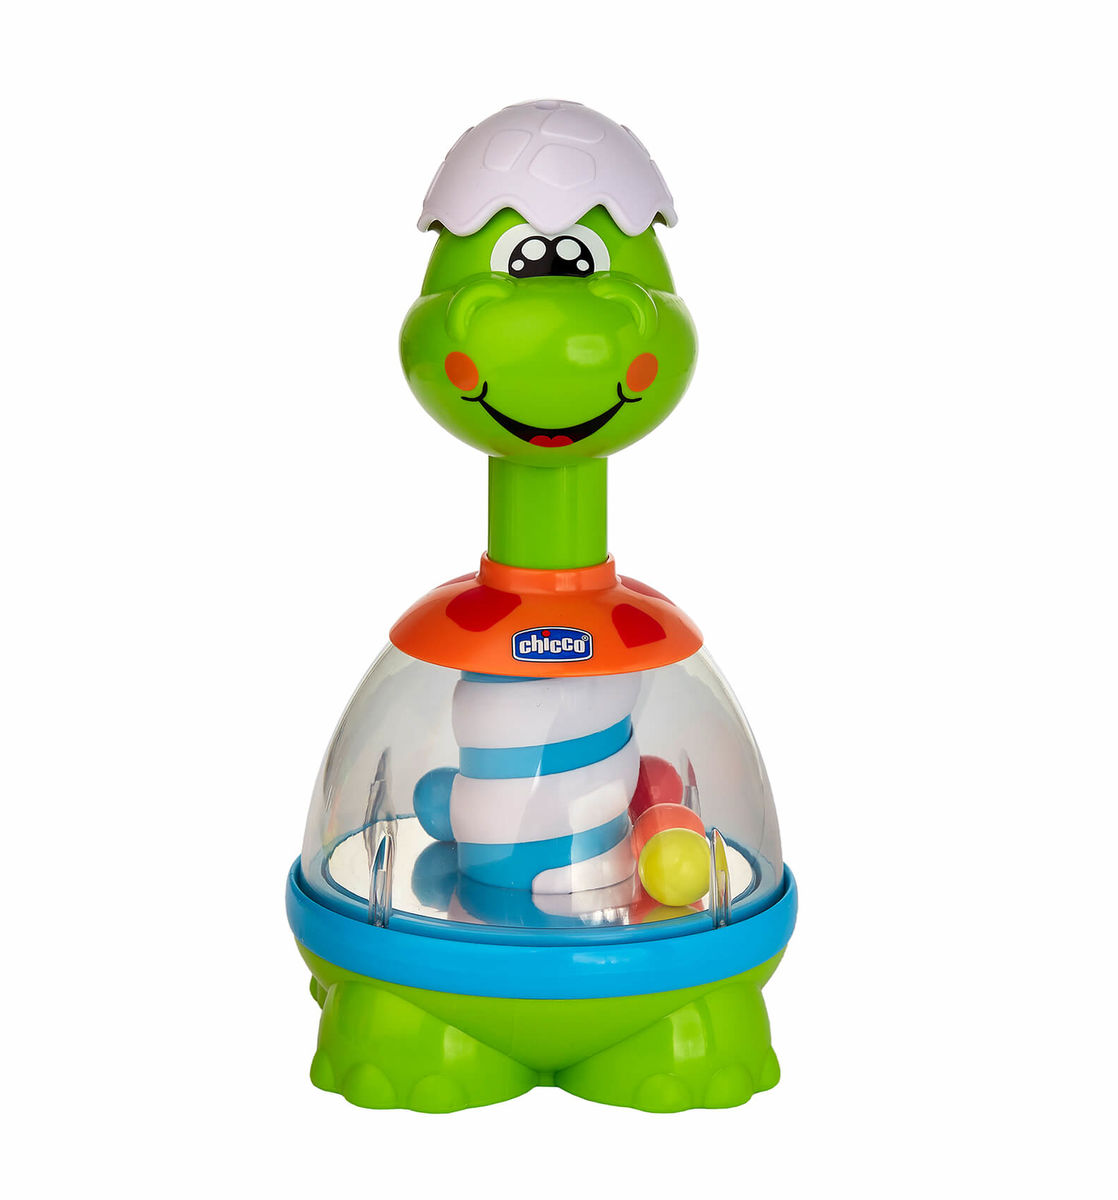 Image of Chicco Baby Senses Spin Dino Spielzeug bei nettoshop.ch